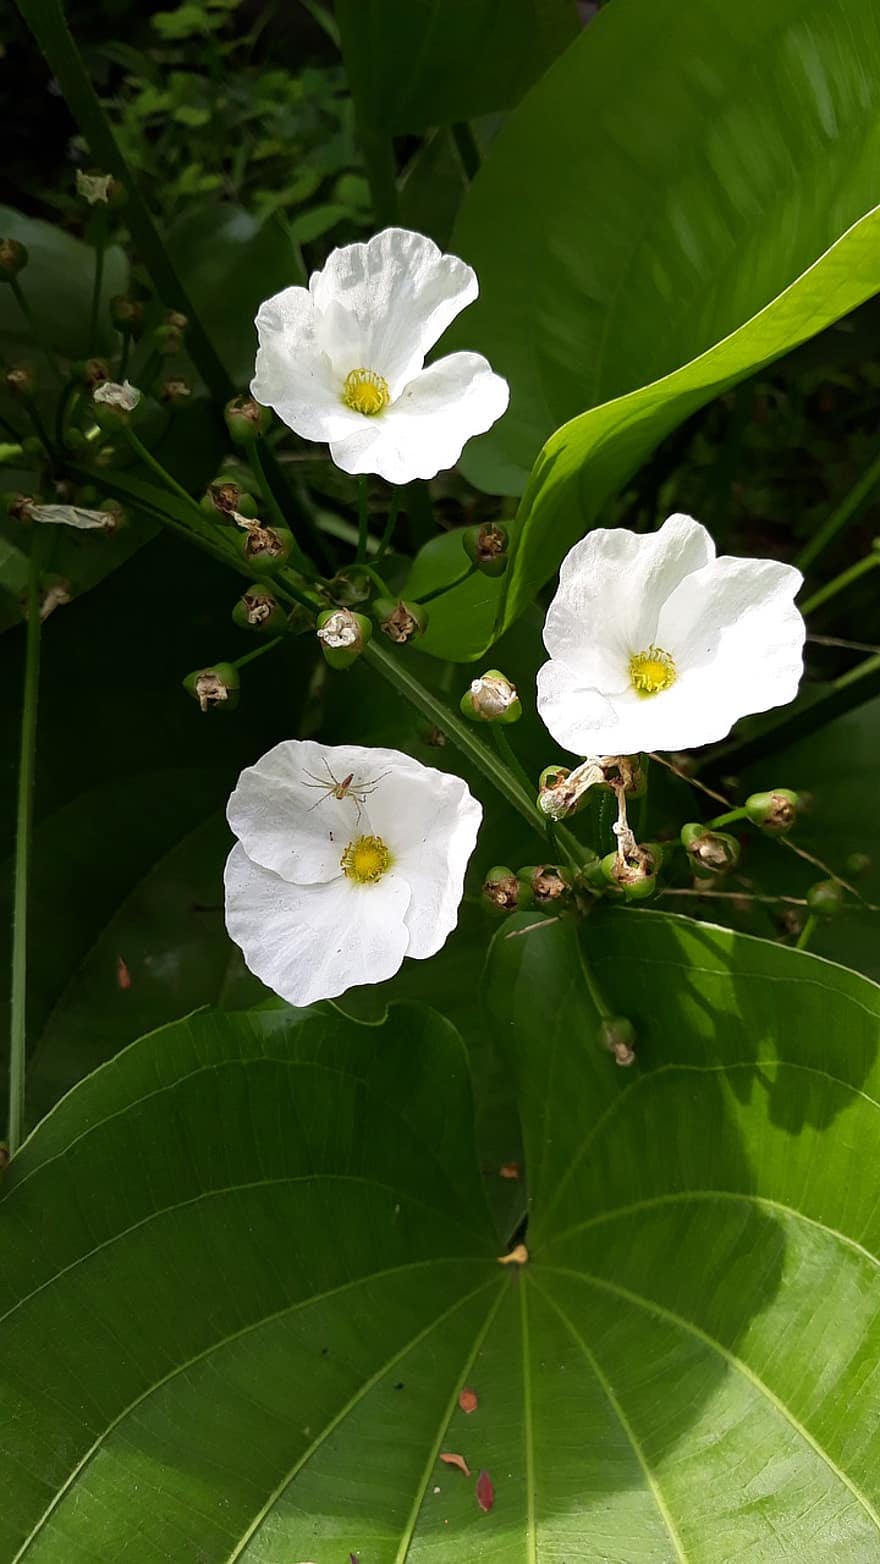 Mexican Sword Plant, Flowers, Plant, White Flowers, Petals, Buds, Bloom, Leaves, Nature